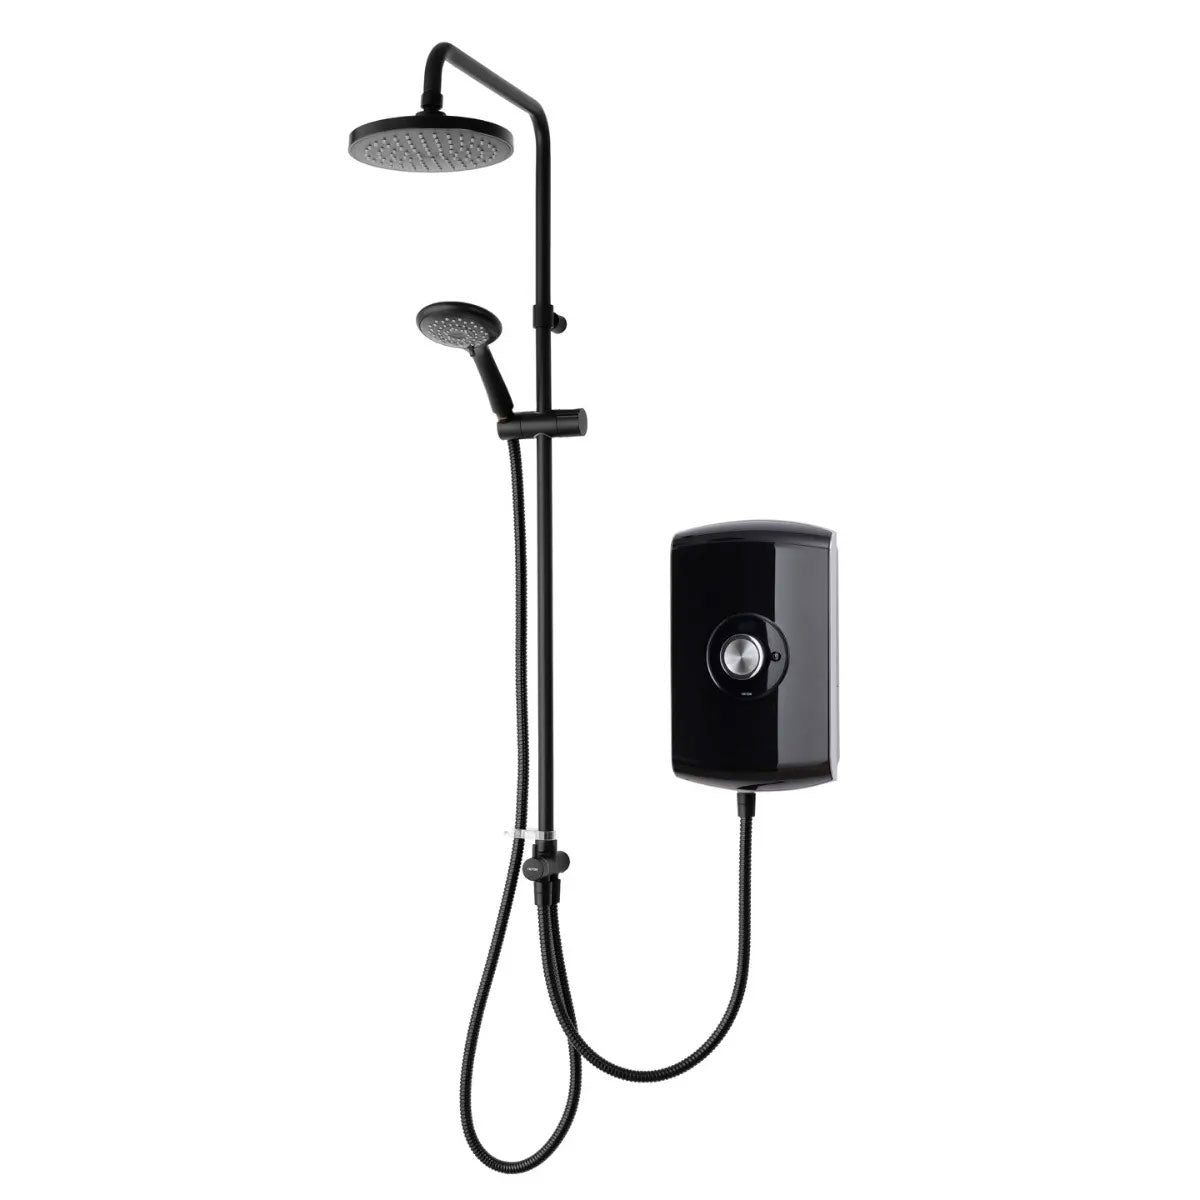 Triton Amore 9.5kW DuElec Electric Shower with Overhead and Sliding Handset - Gloss Black